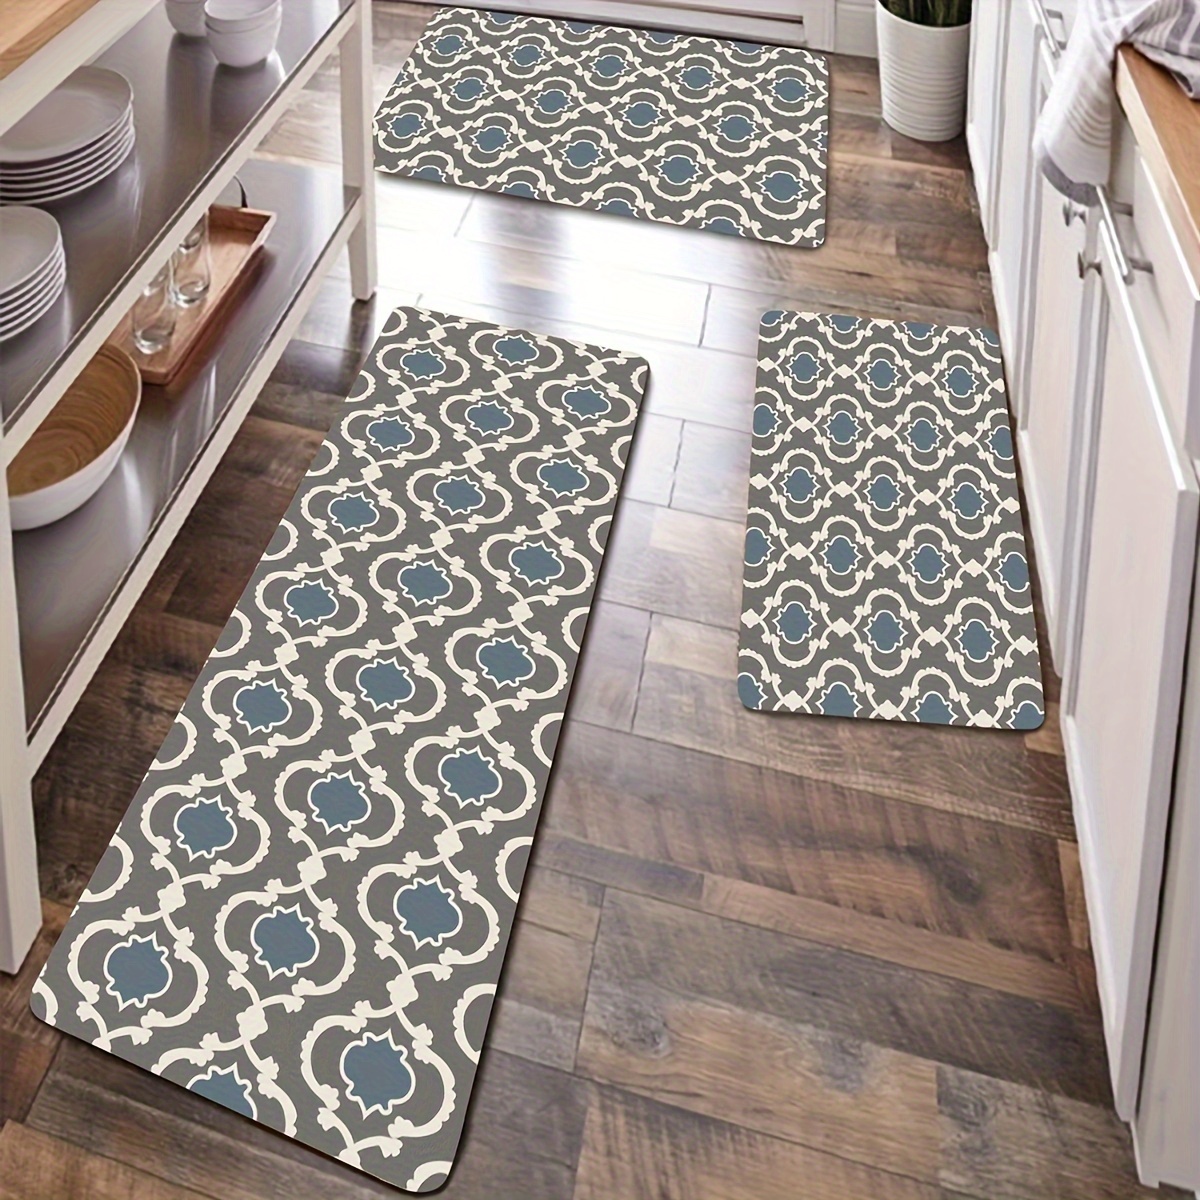 

3-piece Kitchen Rug Set - Machine Washable Non-slip Mats - Durable Polyester Rectangular Runner And Area Rugs For Laundry, Bathroom, And Bedroom - 40x60cm, 50x80cm, 40x120cm